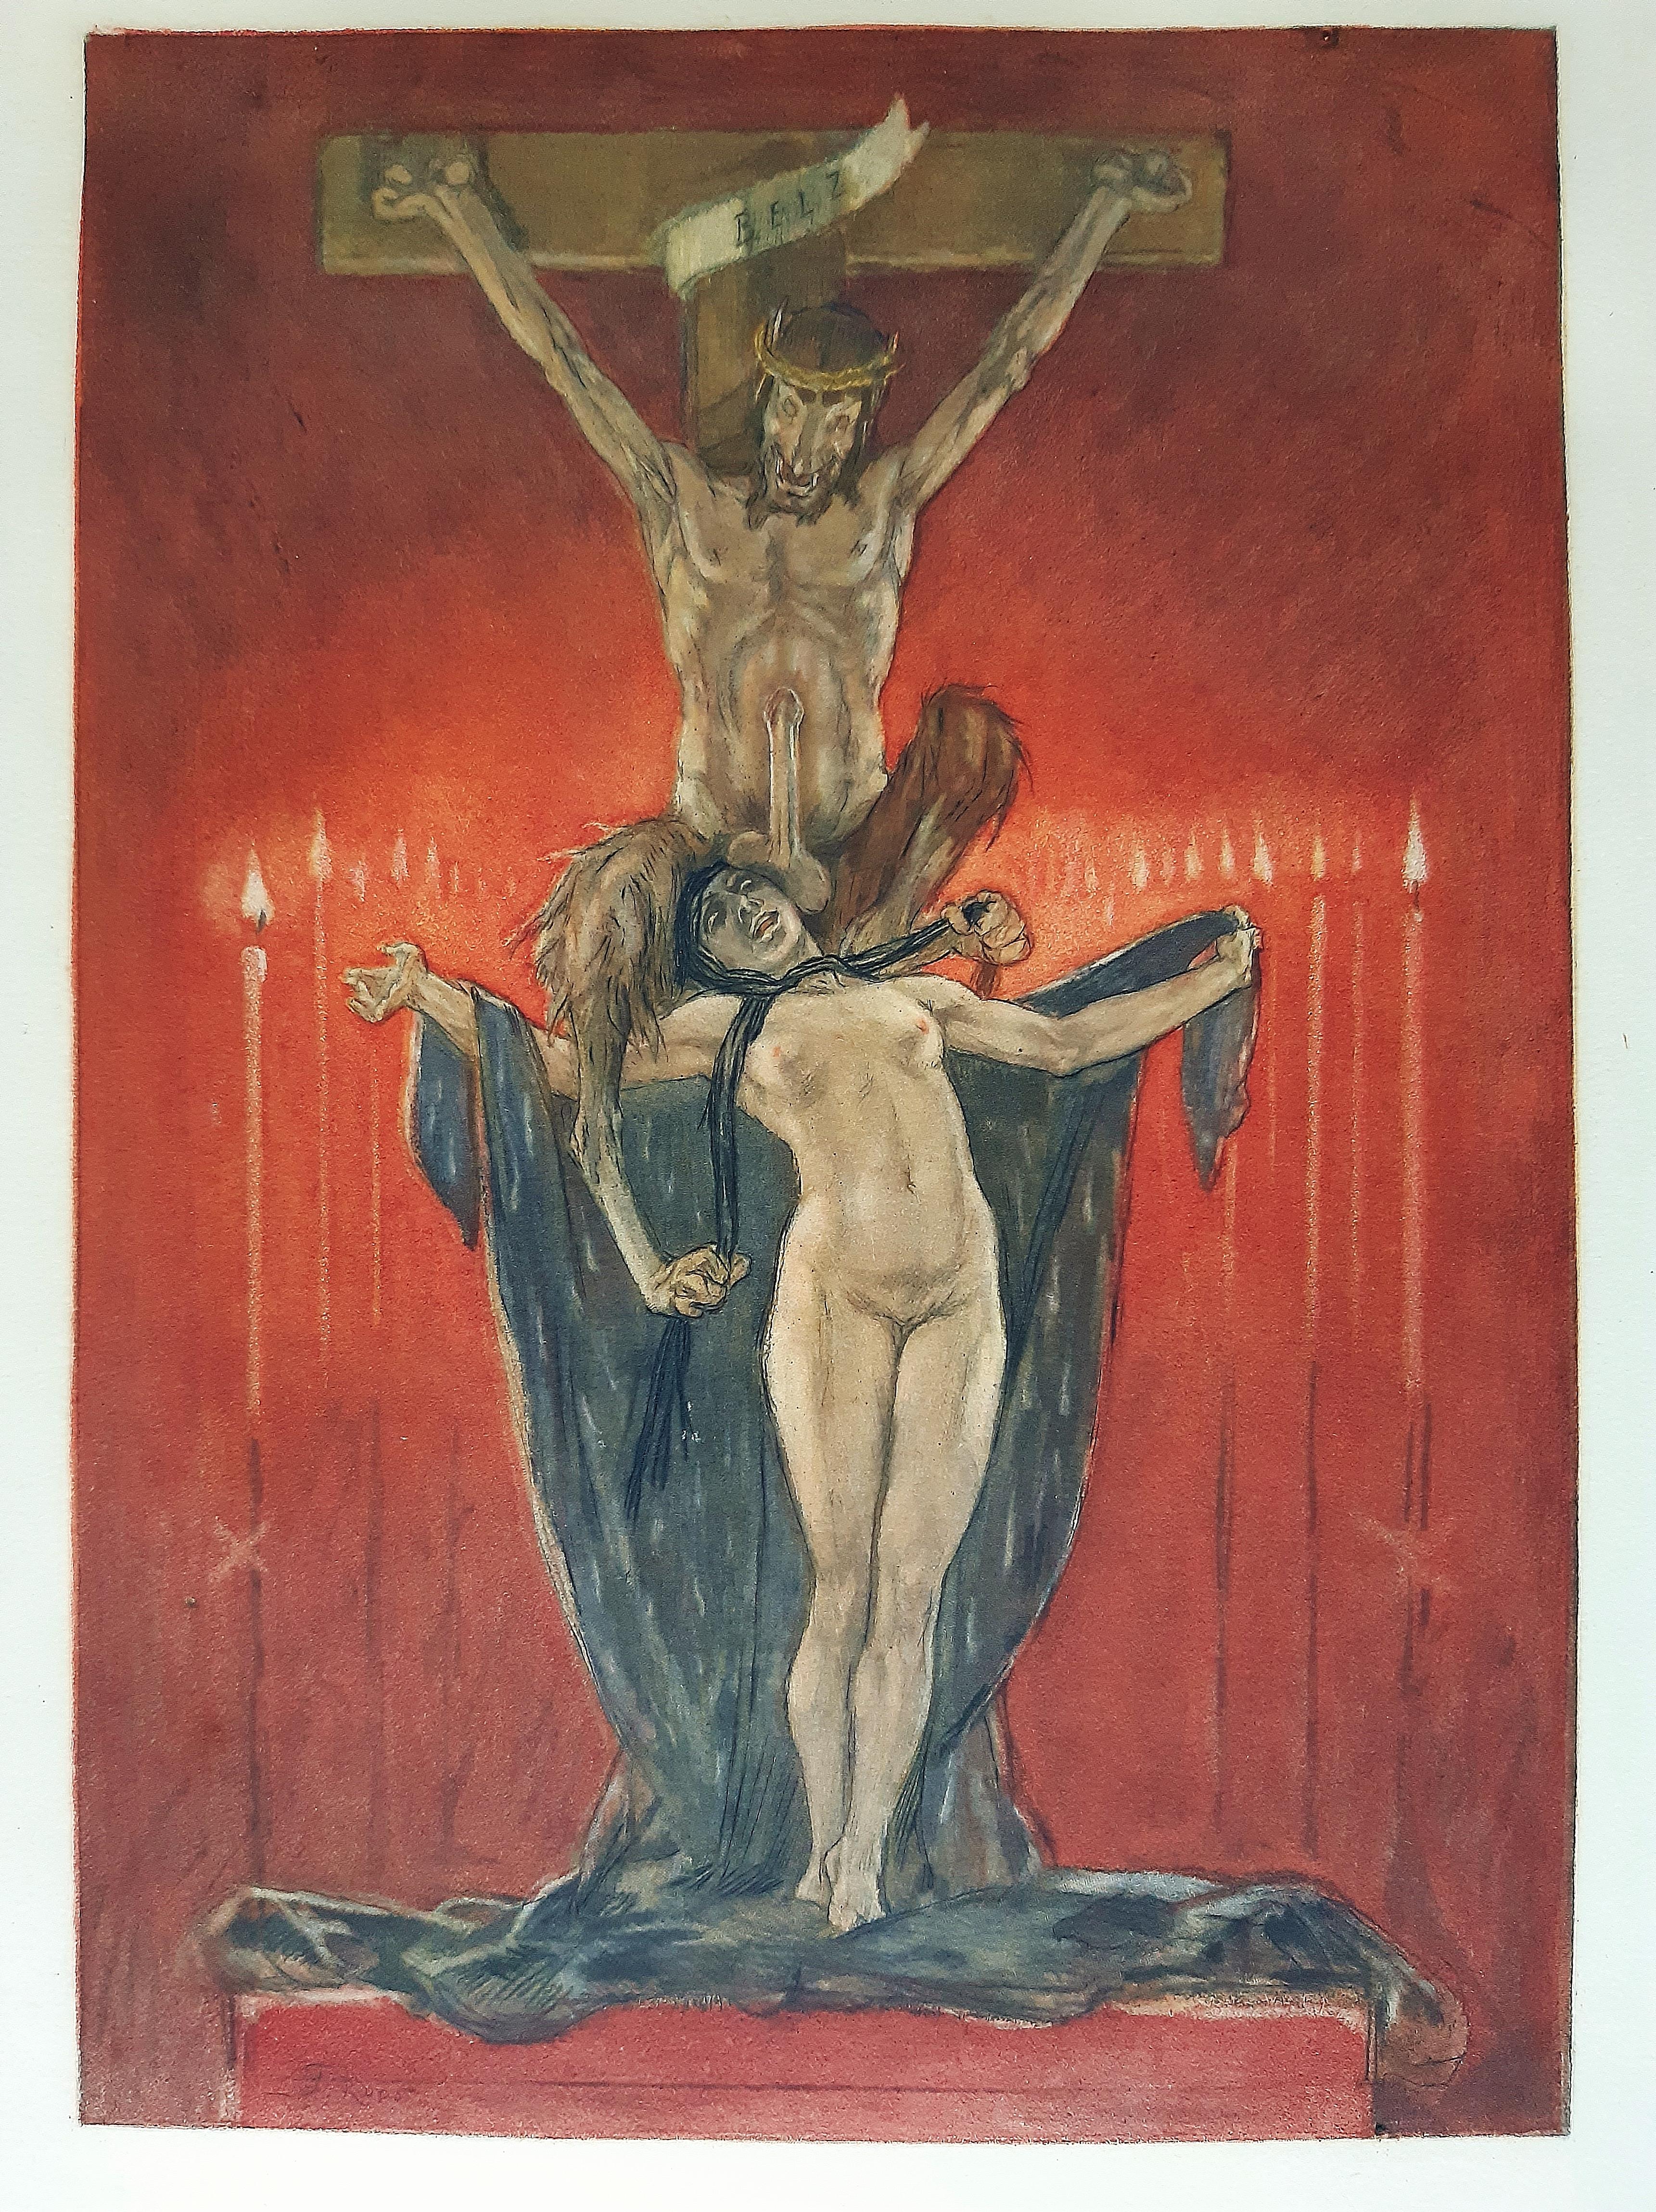 Le Calvaire  - Original Etching and Heliogravure by Félicien Rops - 1882